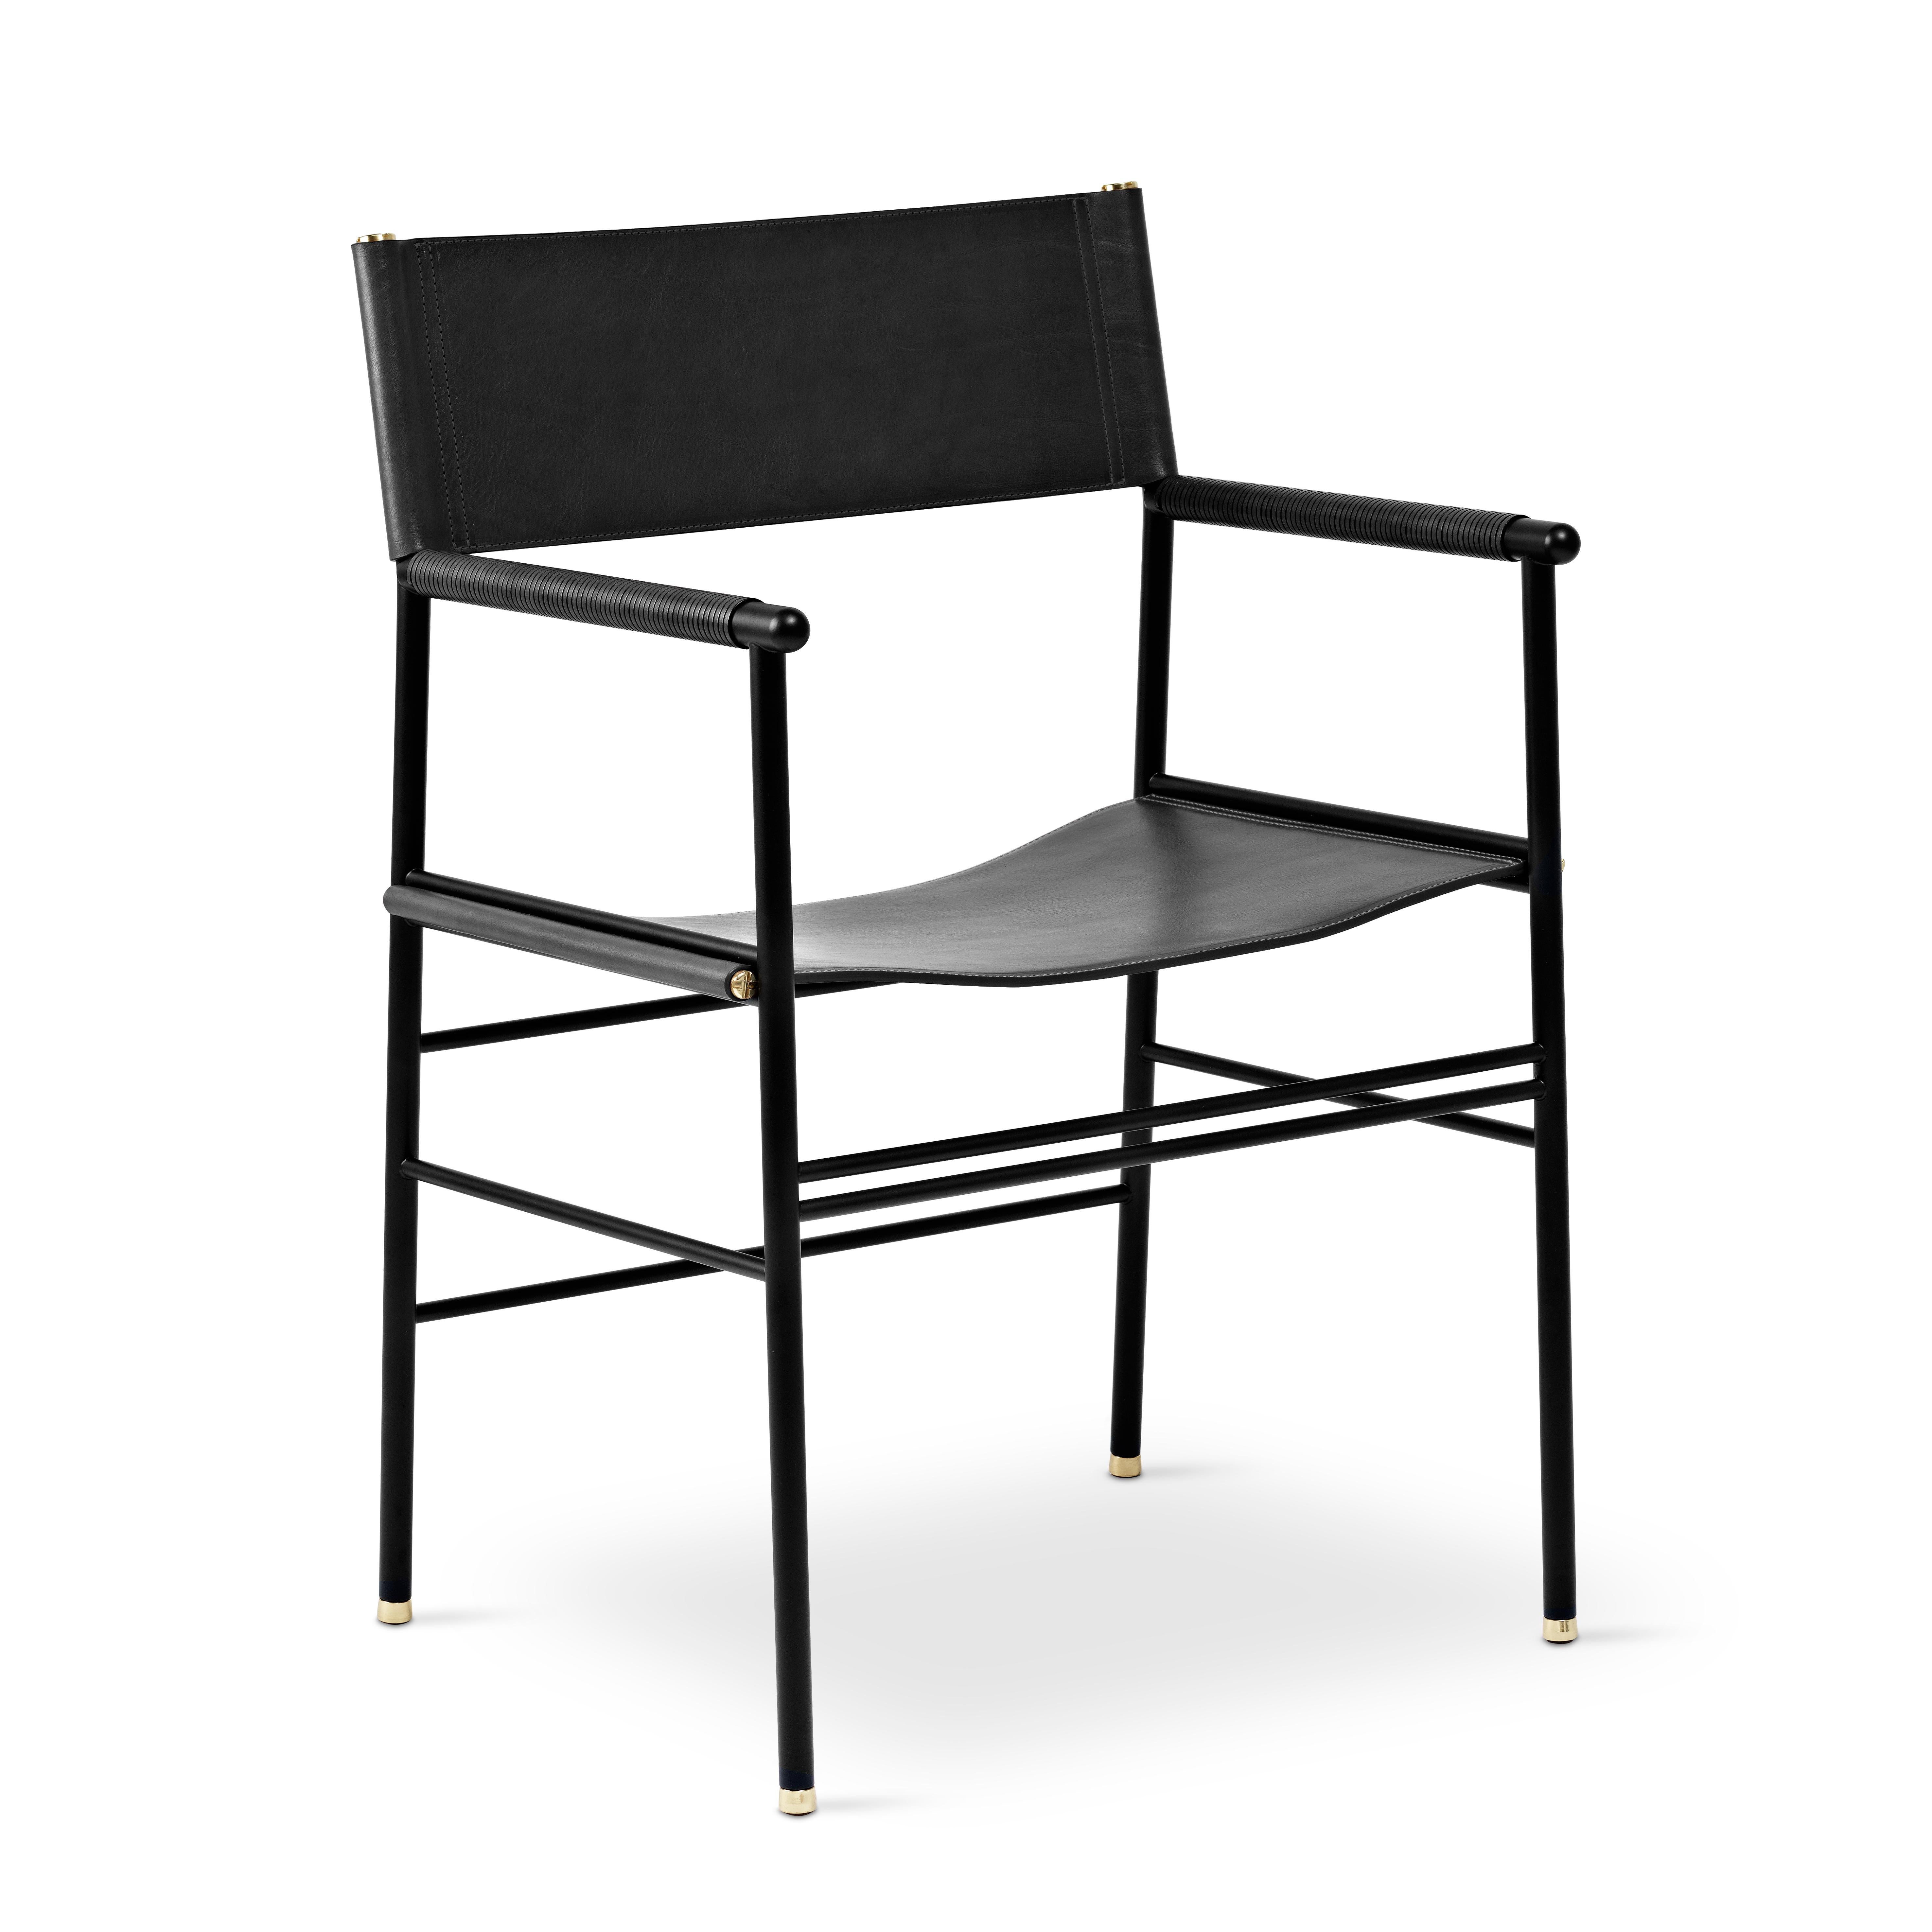 Spanish Set of 3 Handcrafted Contemporary Chair Black Leather & Black Rubber Metal For Sale